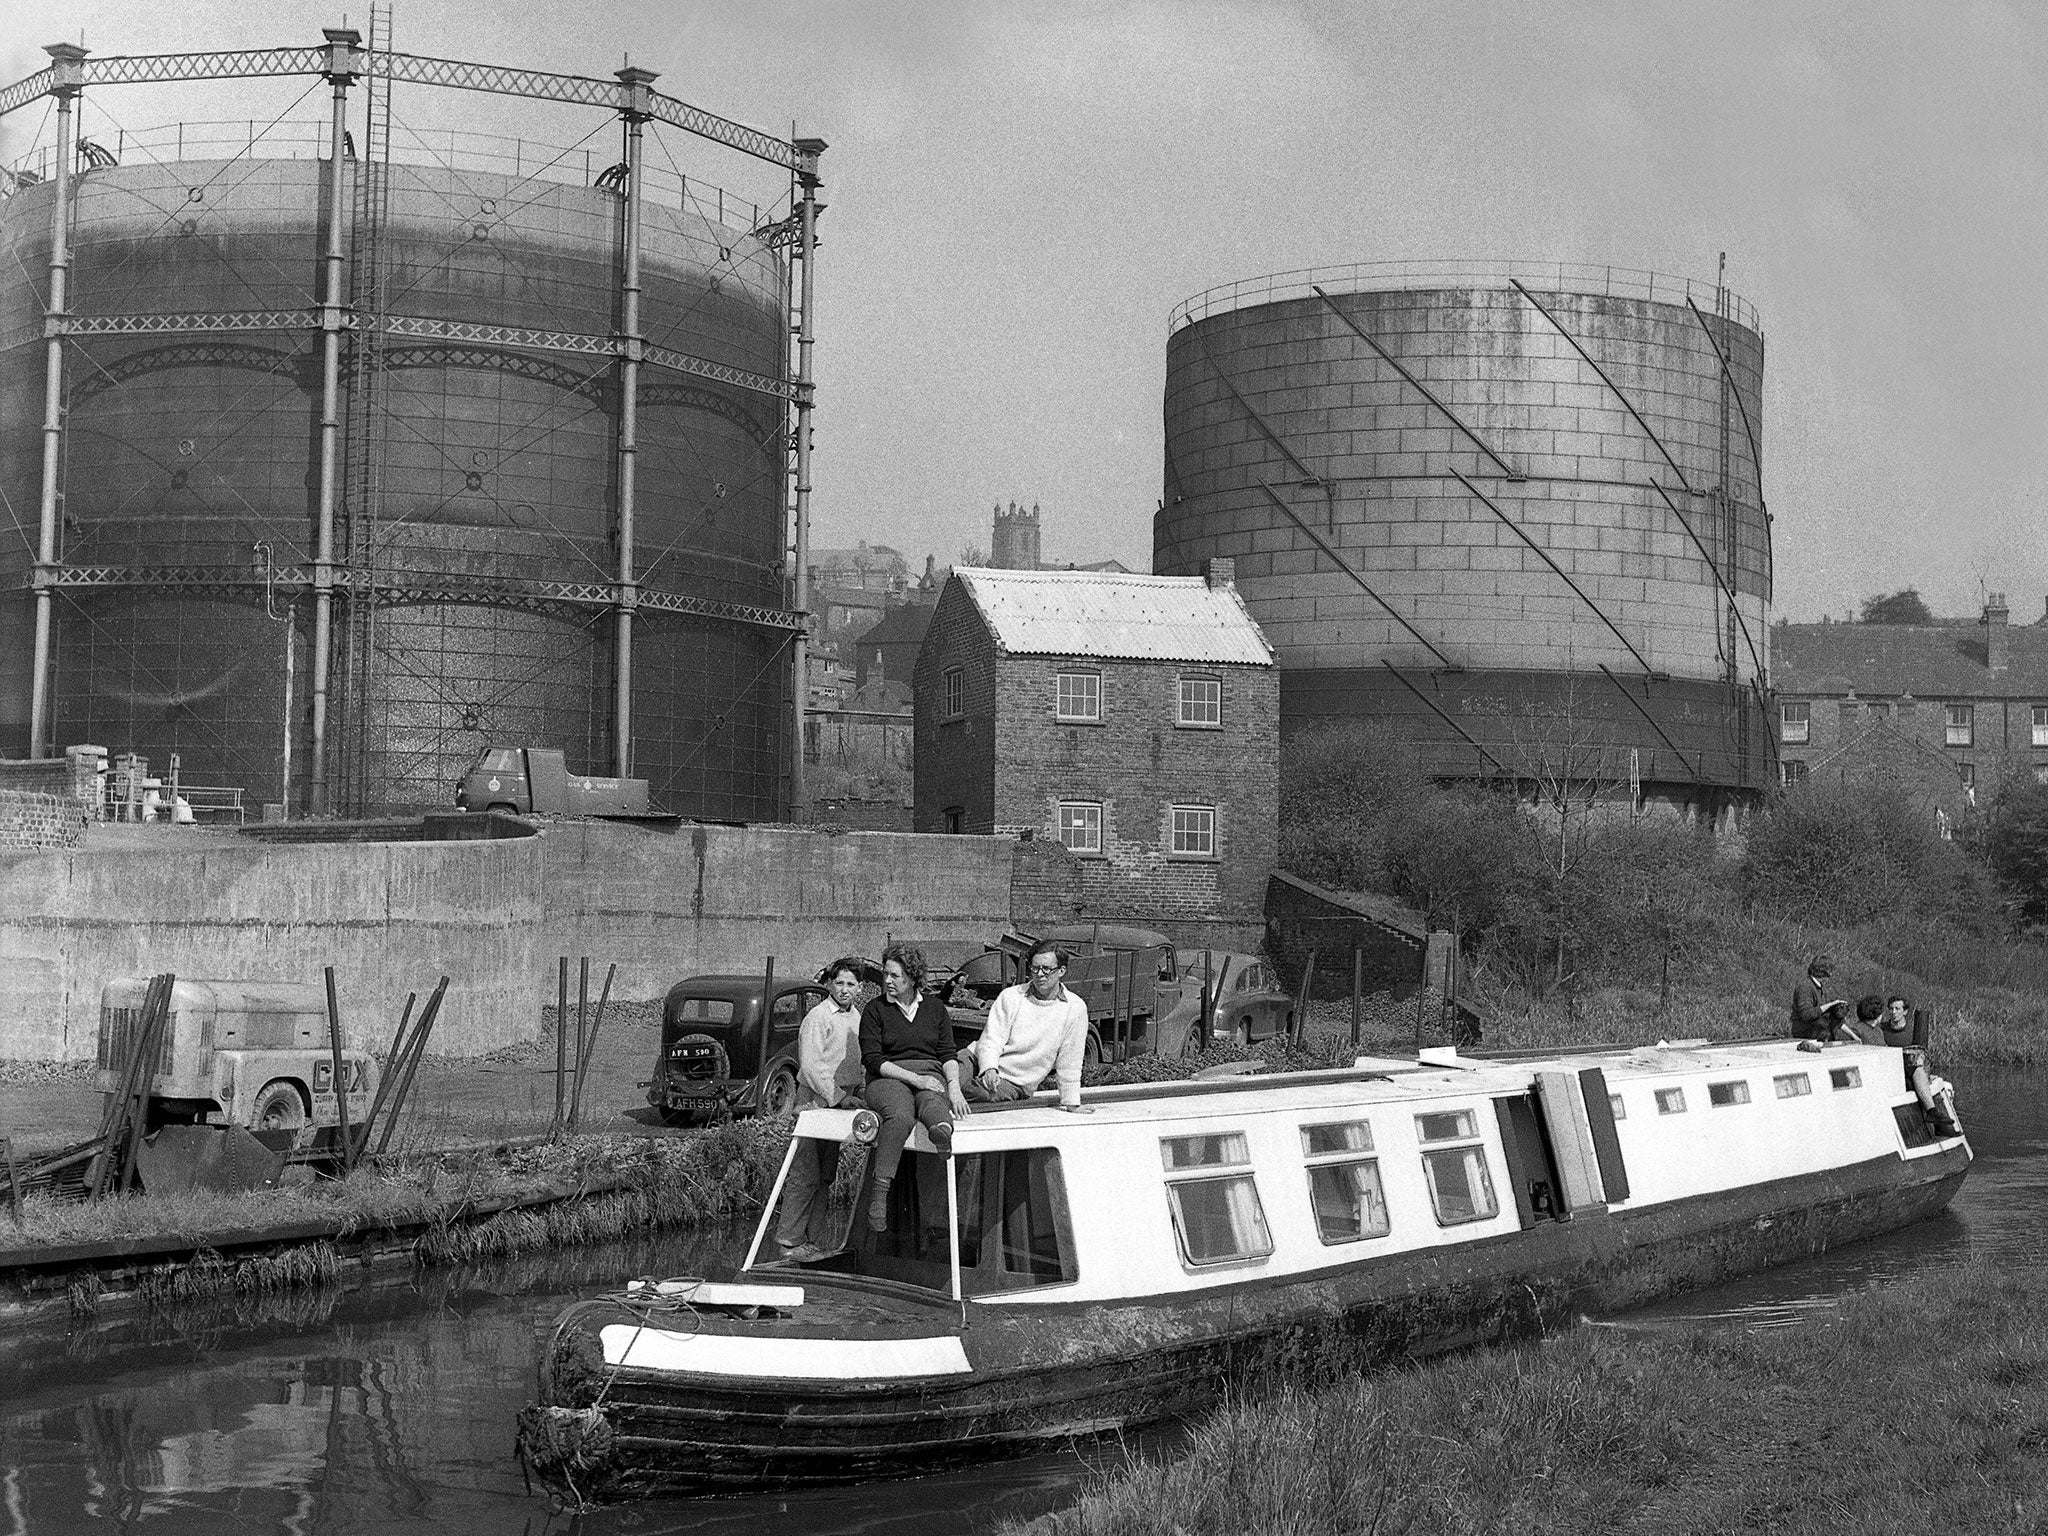 Canal vision: Aickman's day job preserving Britain’s waterways has left us a rare legacy